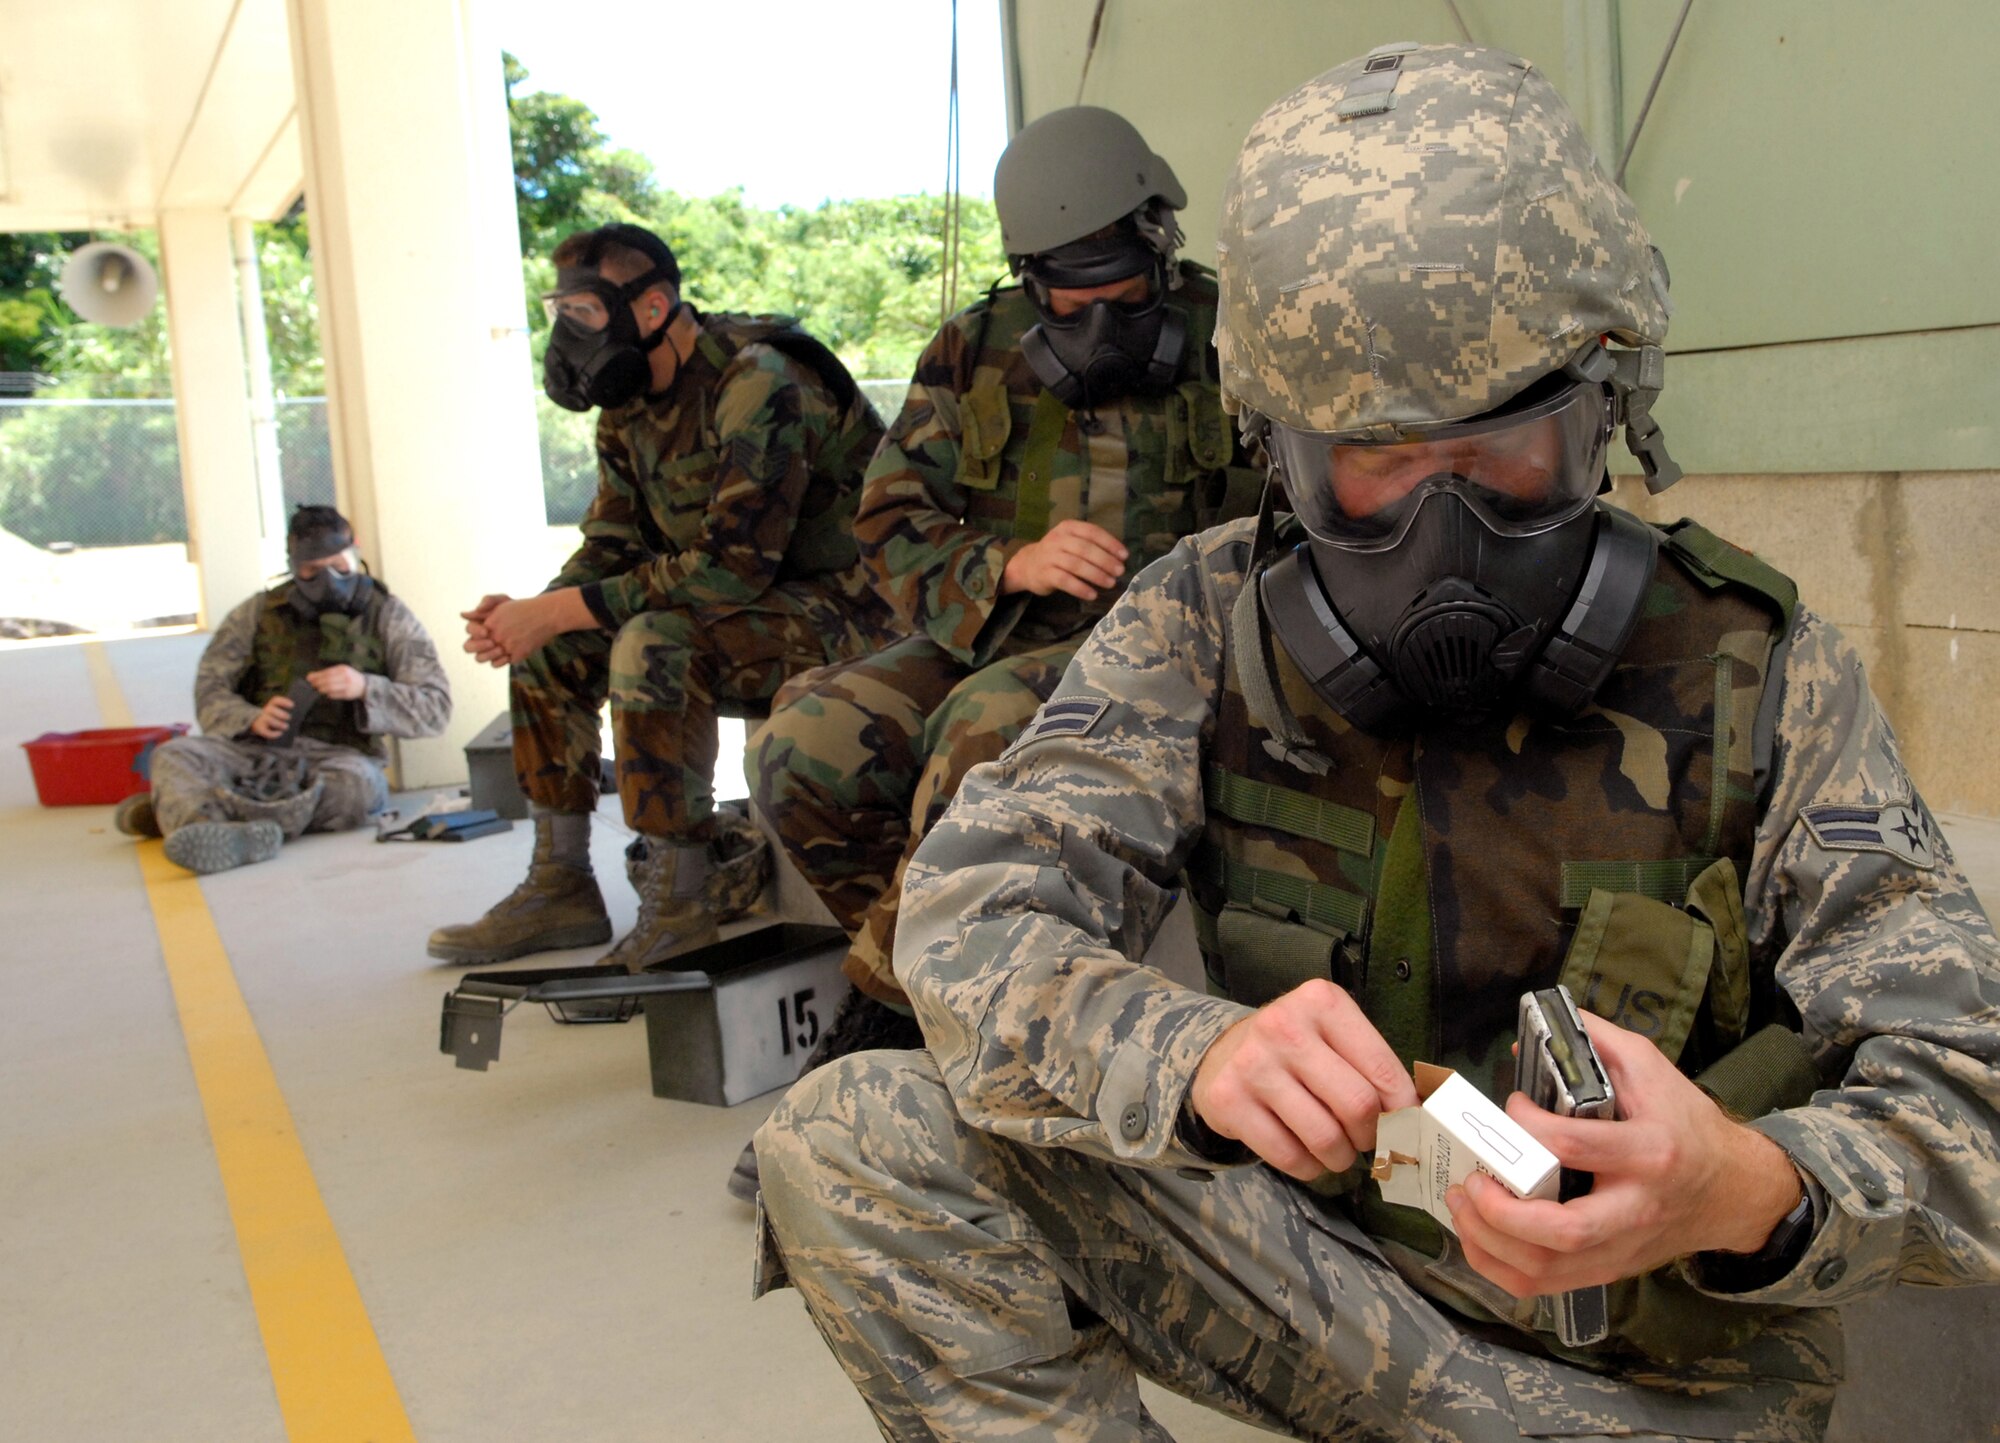 Airmen don their gas masks at the Combat Arms Training and Maintenance to be augmentees for the 18th Security Forces July 29 at Kadena Air Base, Japan. The Airmen go through a set 3-day course consisting of weapons firing, classroom instruction of SF responsibilities, and hands-on training made up of searching, handcuffing, and challenging individuals and vehicles. 
(U.S. Air Force photo/Tech. Sgt. Rey Ramon)         